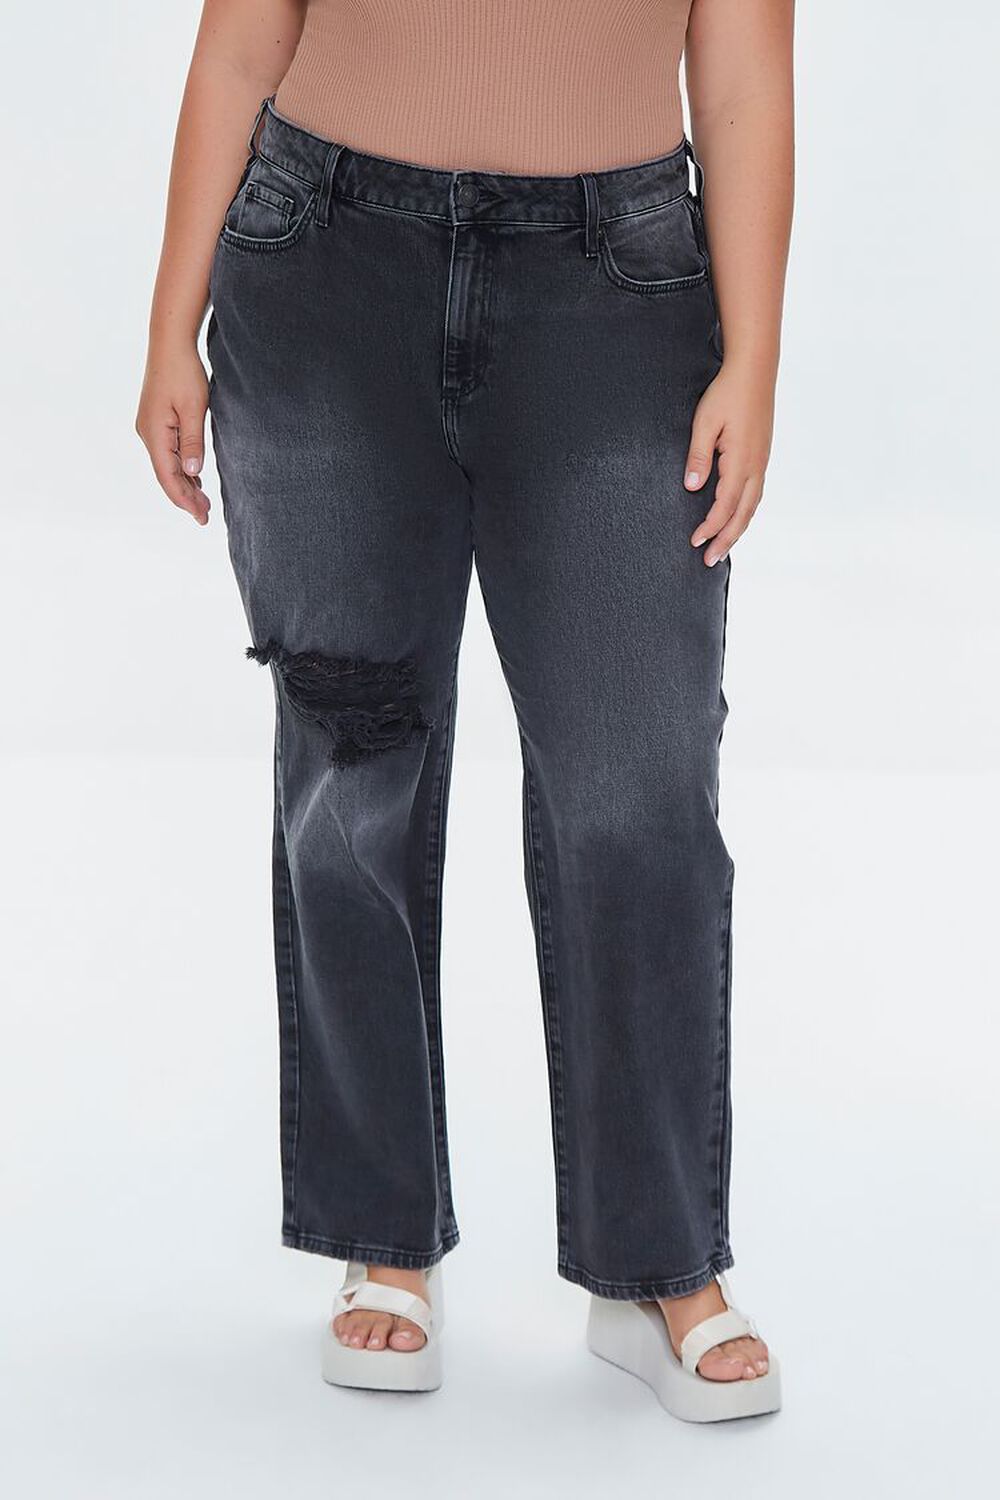 WASHED BLACK Plus Size 90s-Fit High-Rise Jeans, image 2